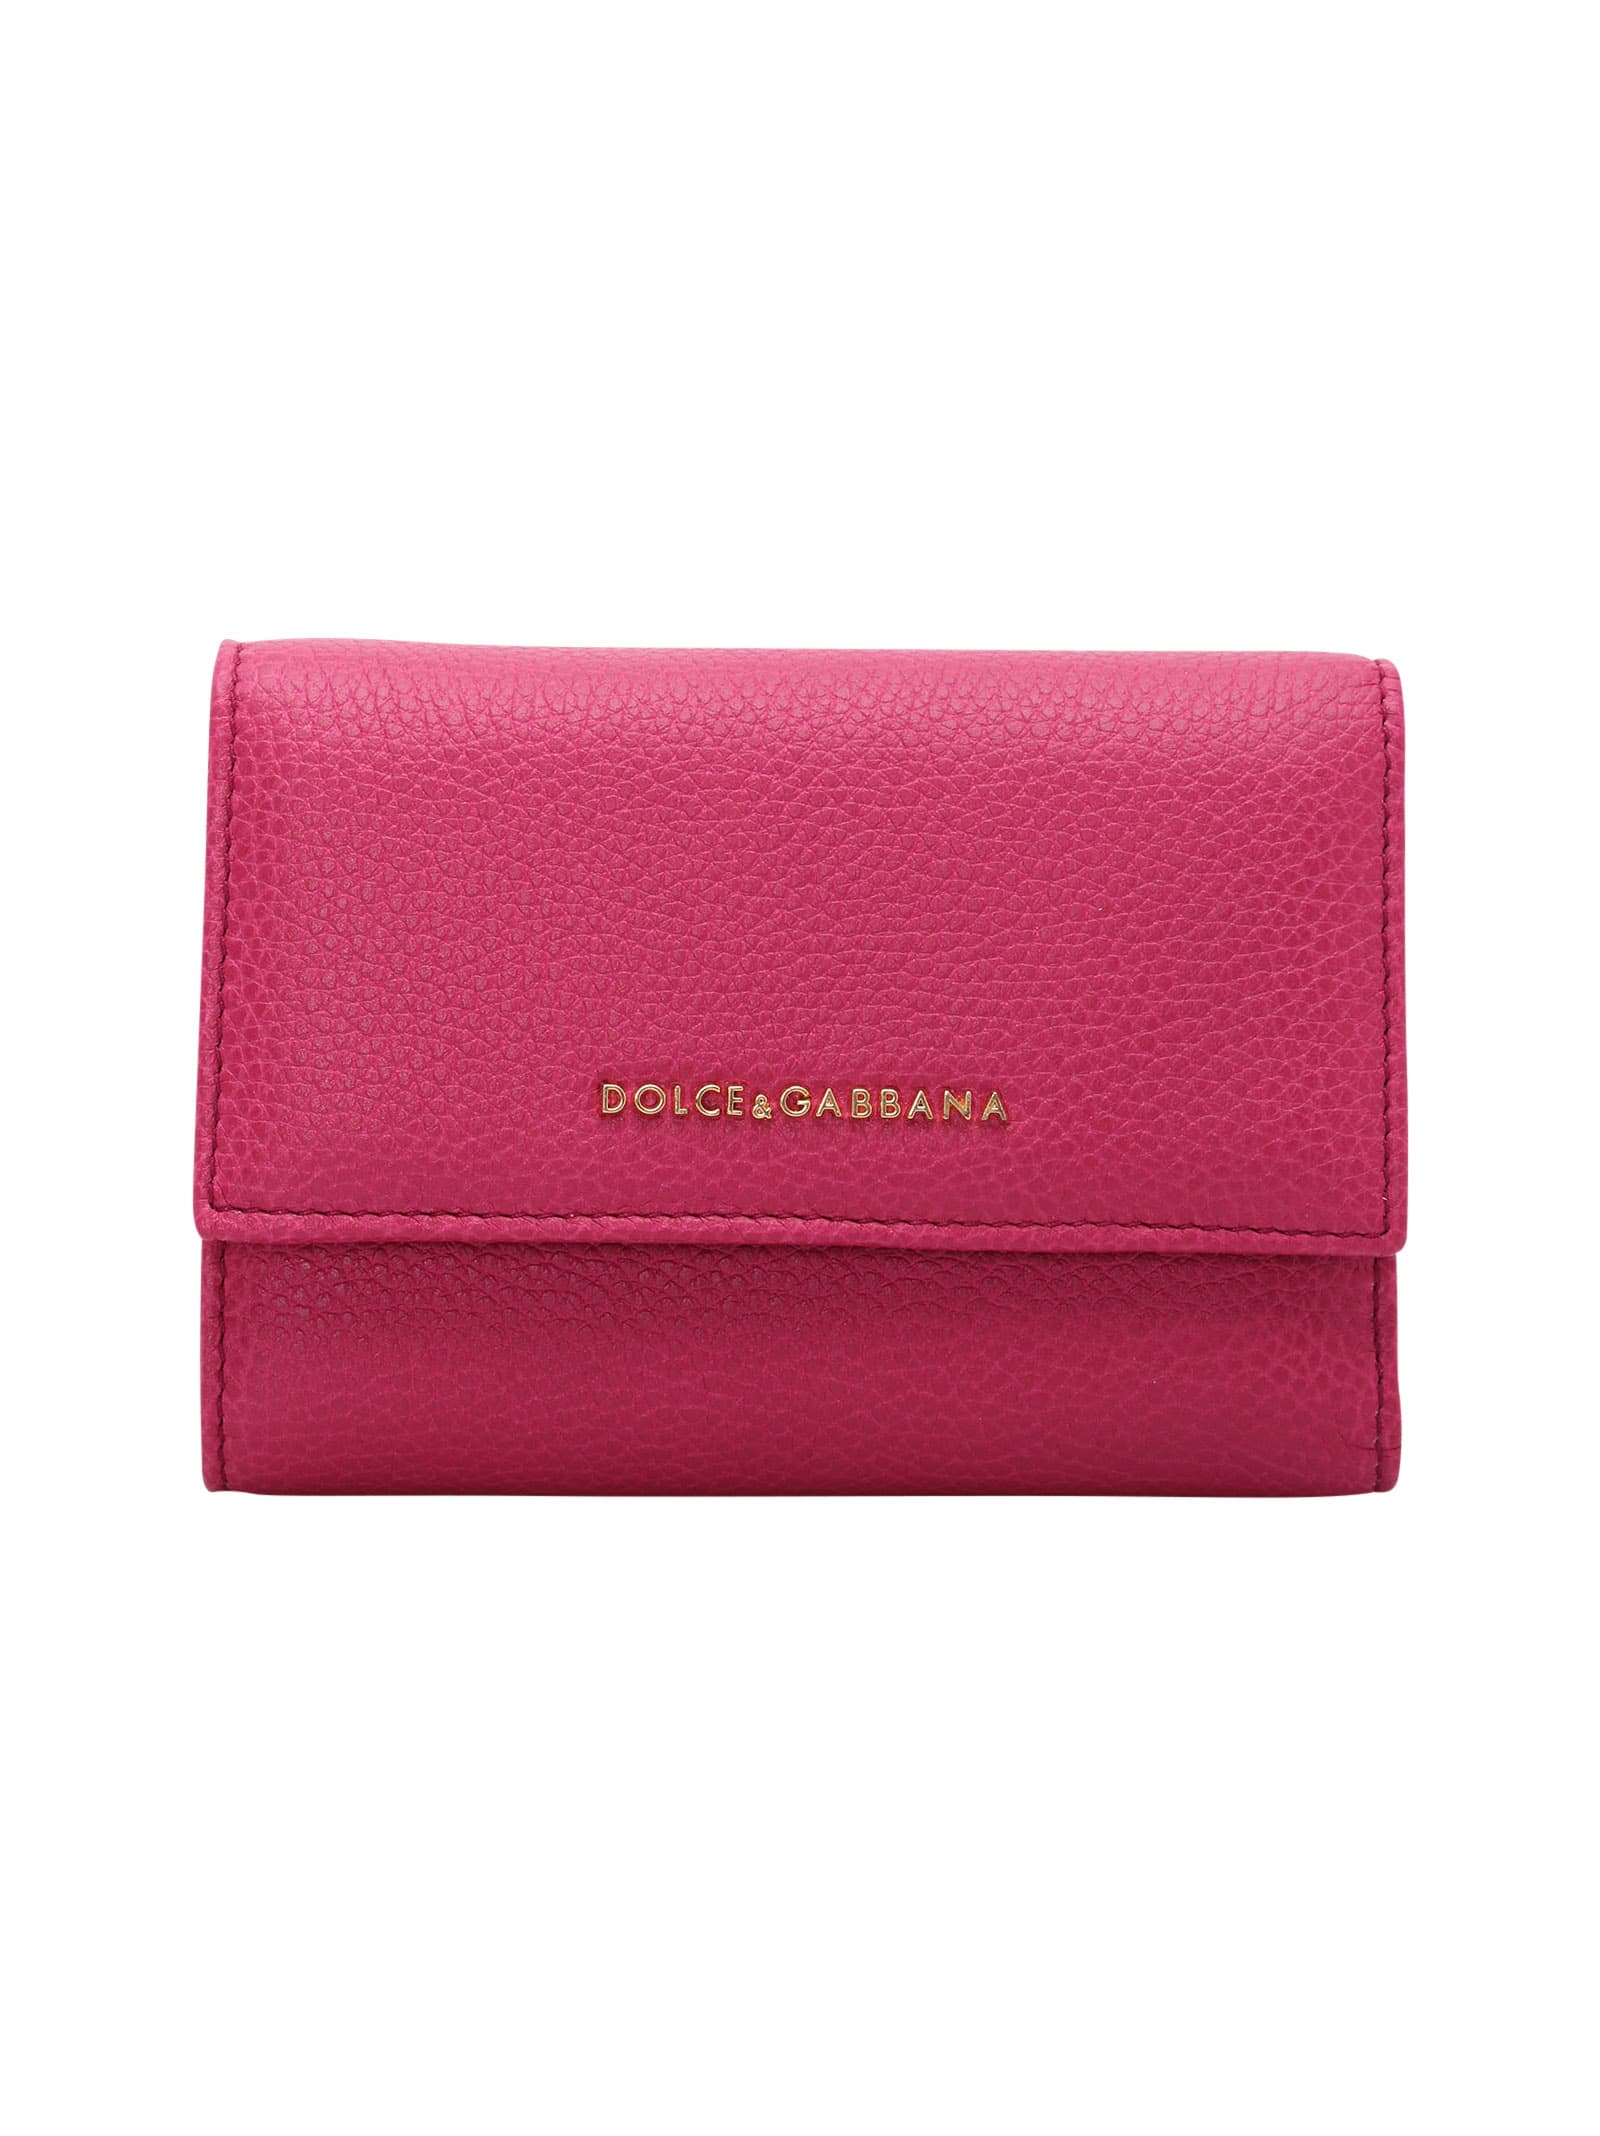 DOLCE & GABBANA LEATHER WALLET,11261103